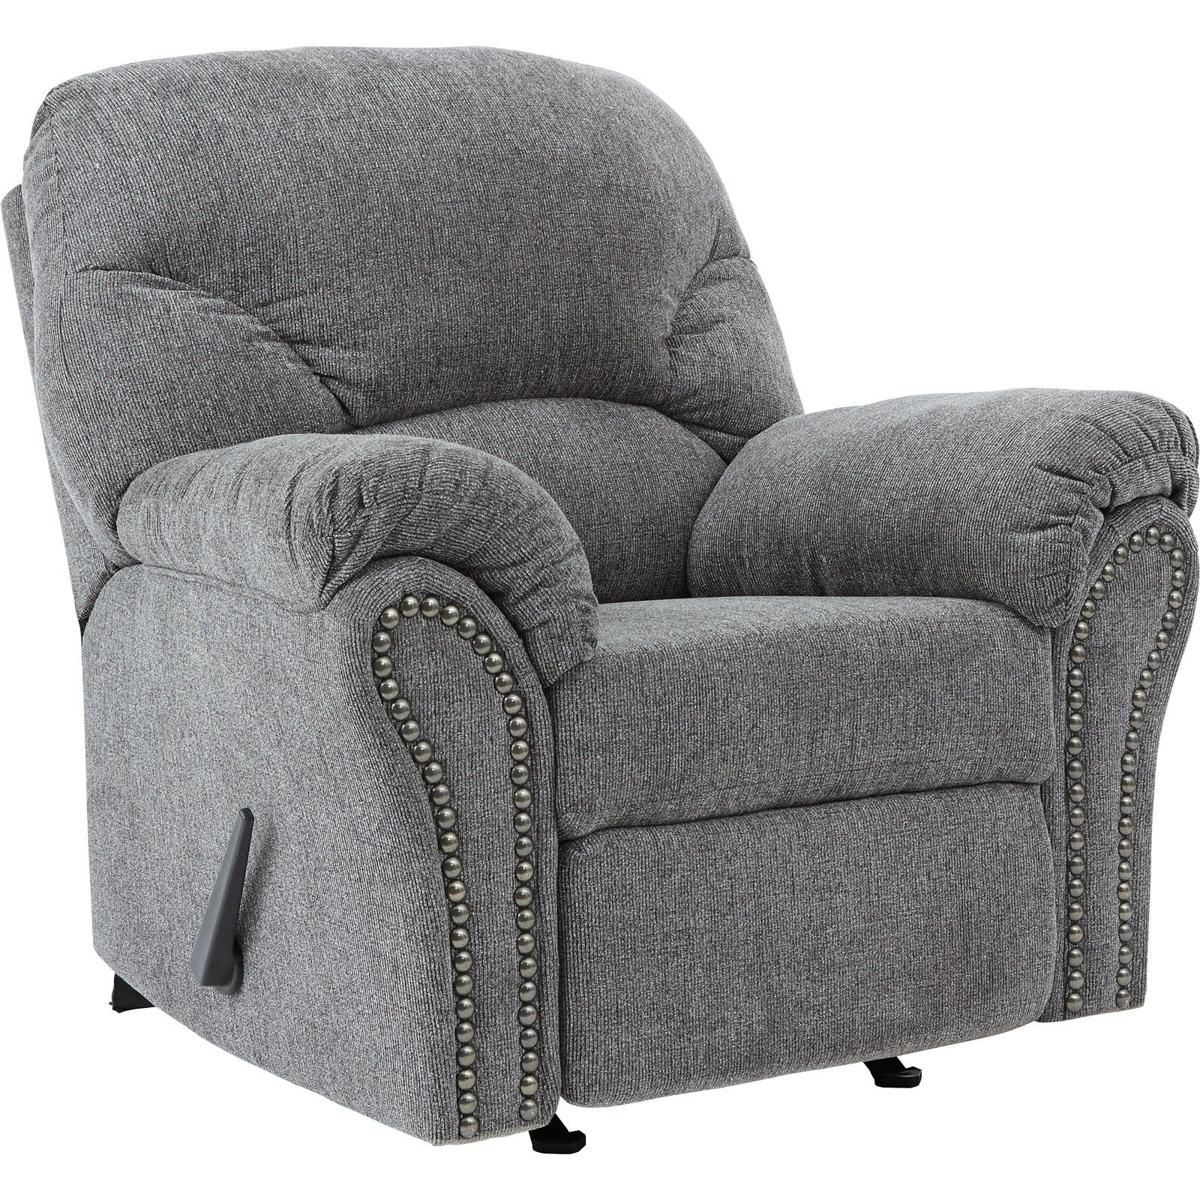 Picture of Allmax Pewter Rocker Recliner